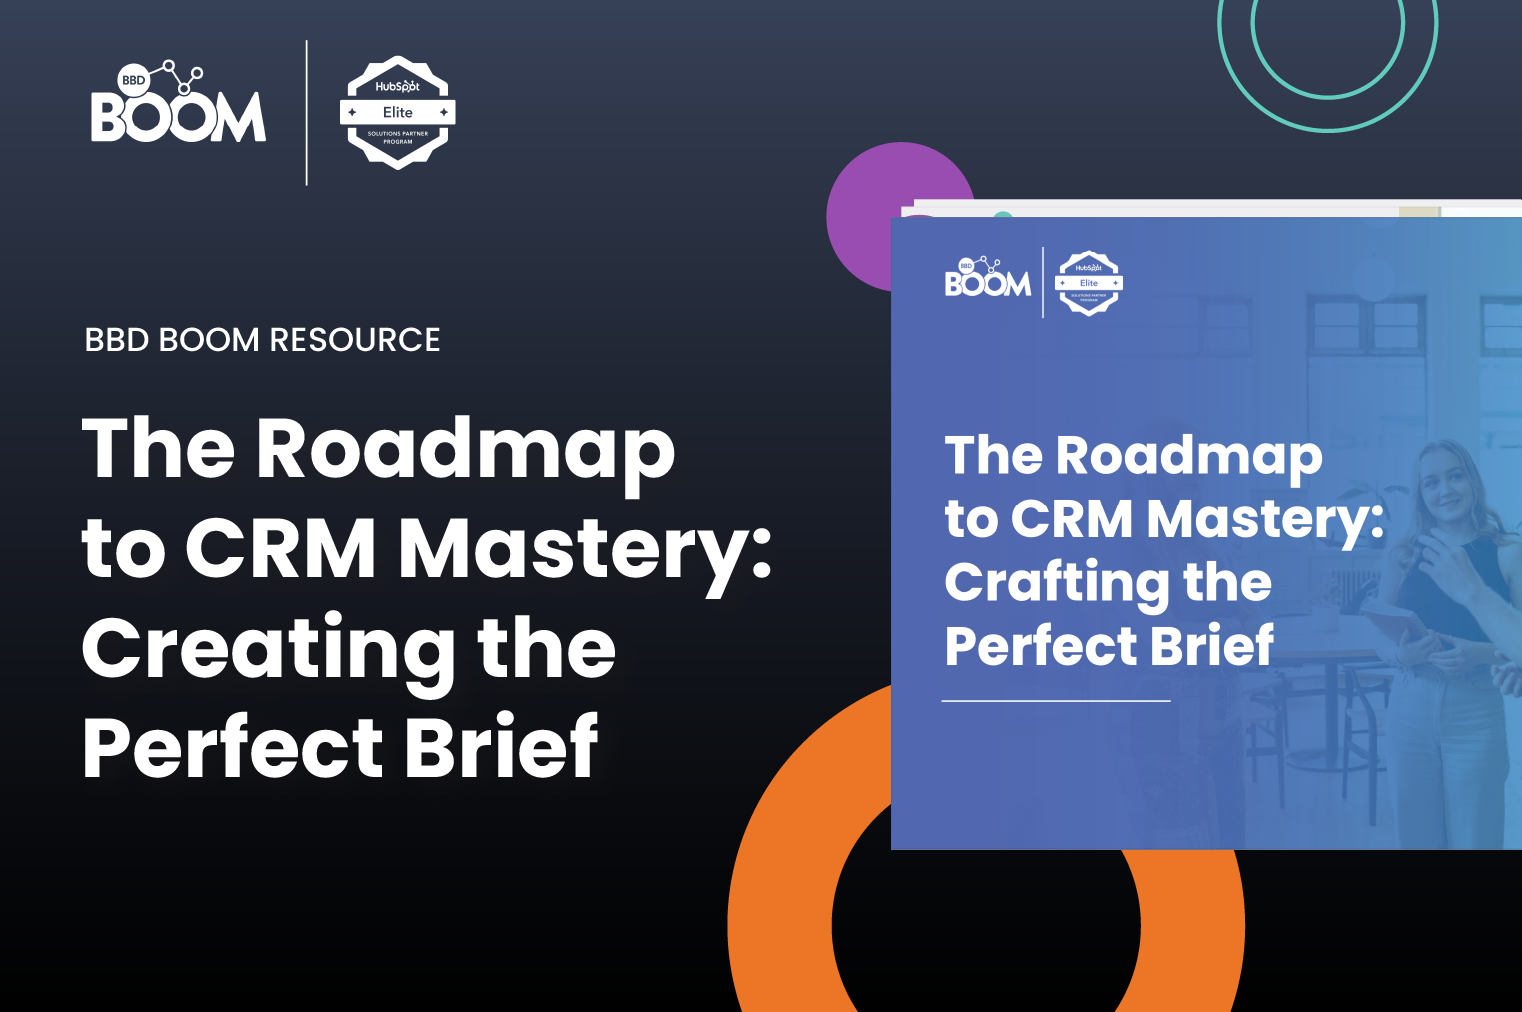 The Roadmap to CRM Mastery: Crafting the Perfect Brief